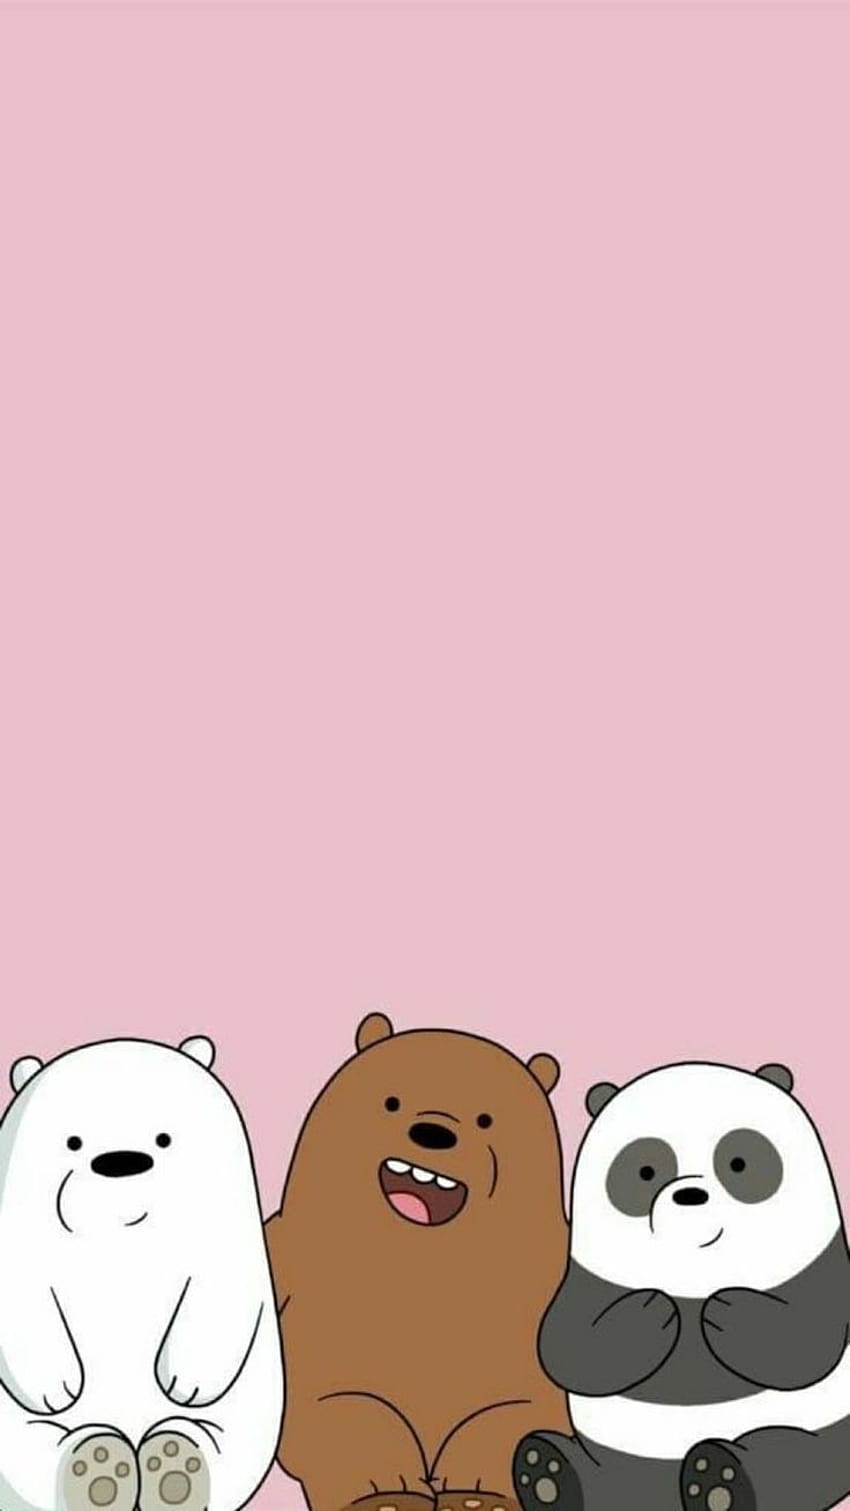 Cartoon wallpaper, three bears, white bear, brown bear and panda bear, sitting next to each other, pink background - We Bare Bears